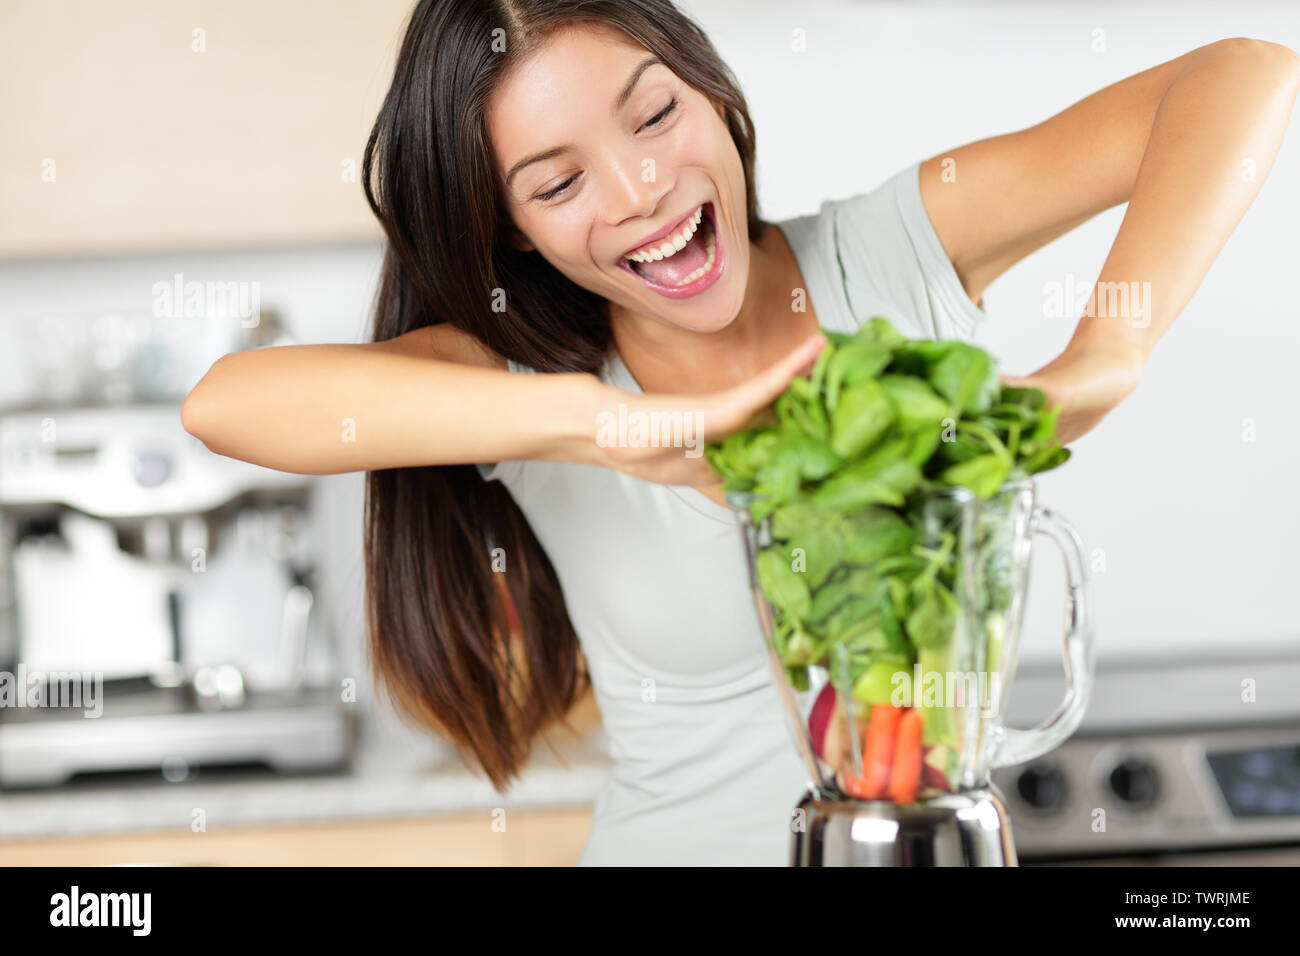 Vegetable smoothie woman making green smoothies with blender home in kitchen. Healthy raw eating lifestyle concept portrait of beautiful young woman preparing drink with spinach, carrots, celery etc. Stock Photo